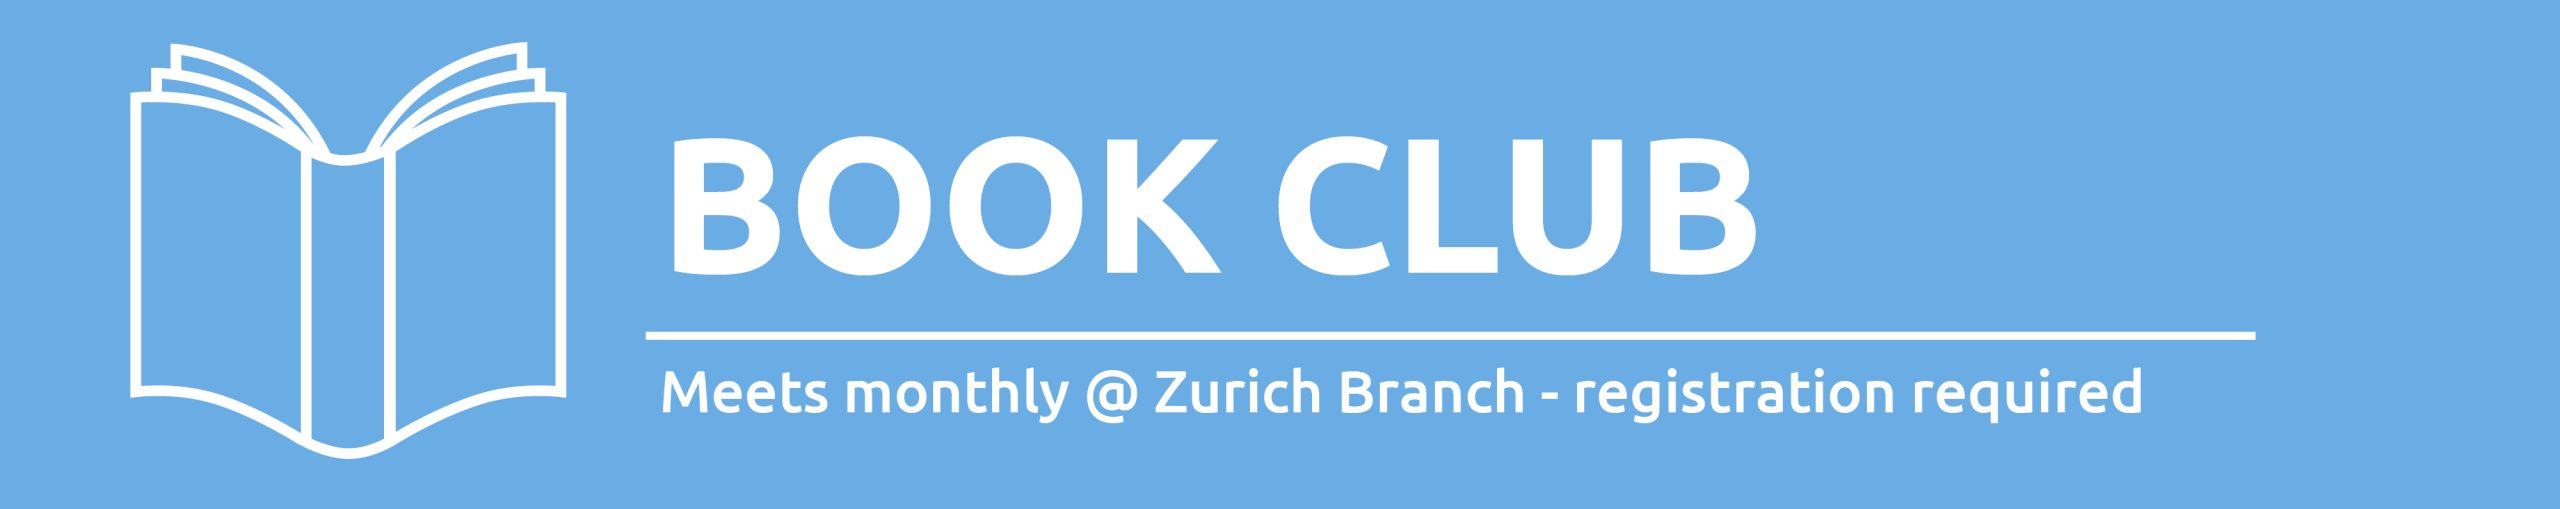 Illustration of a book with text promoting Zurich Book Club